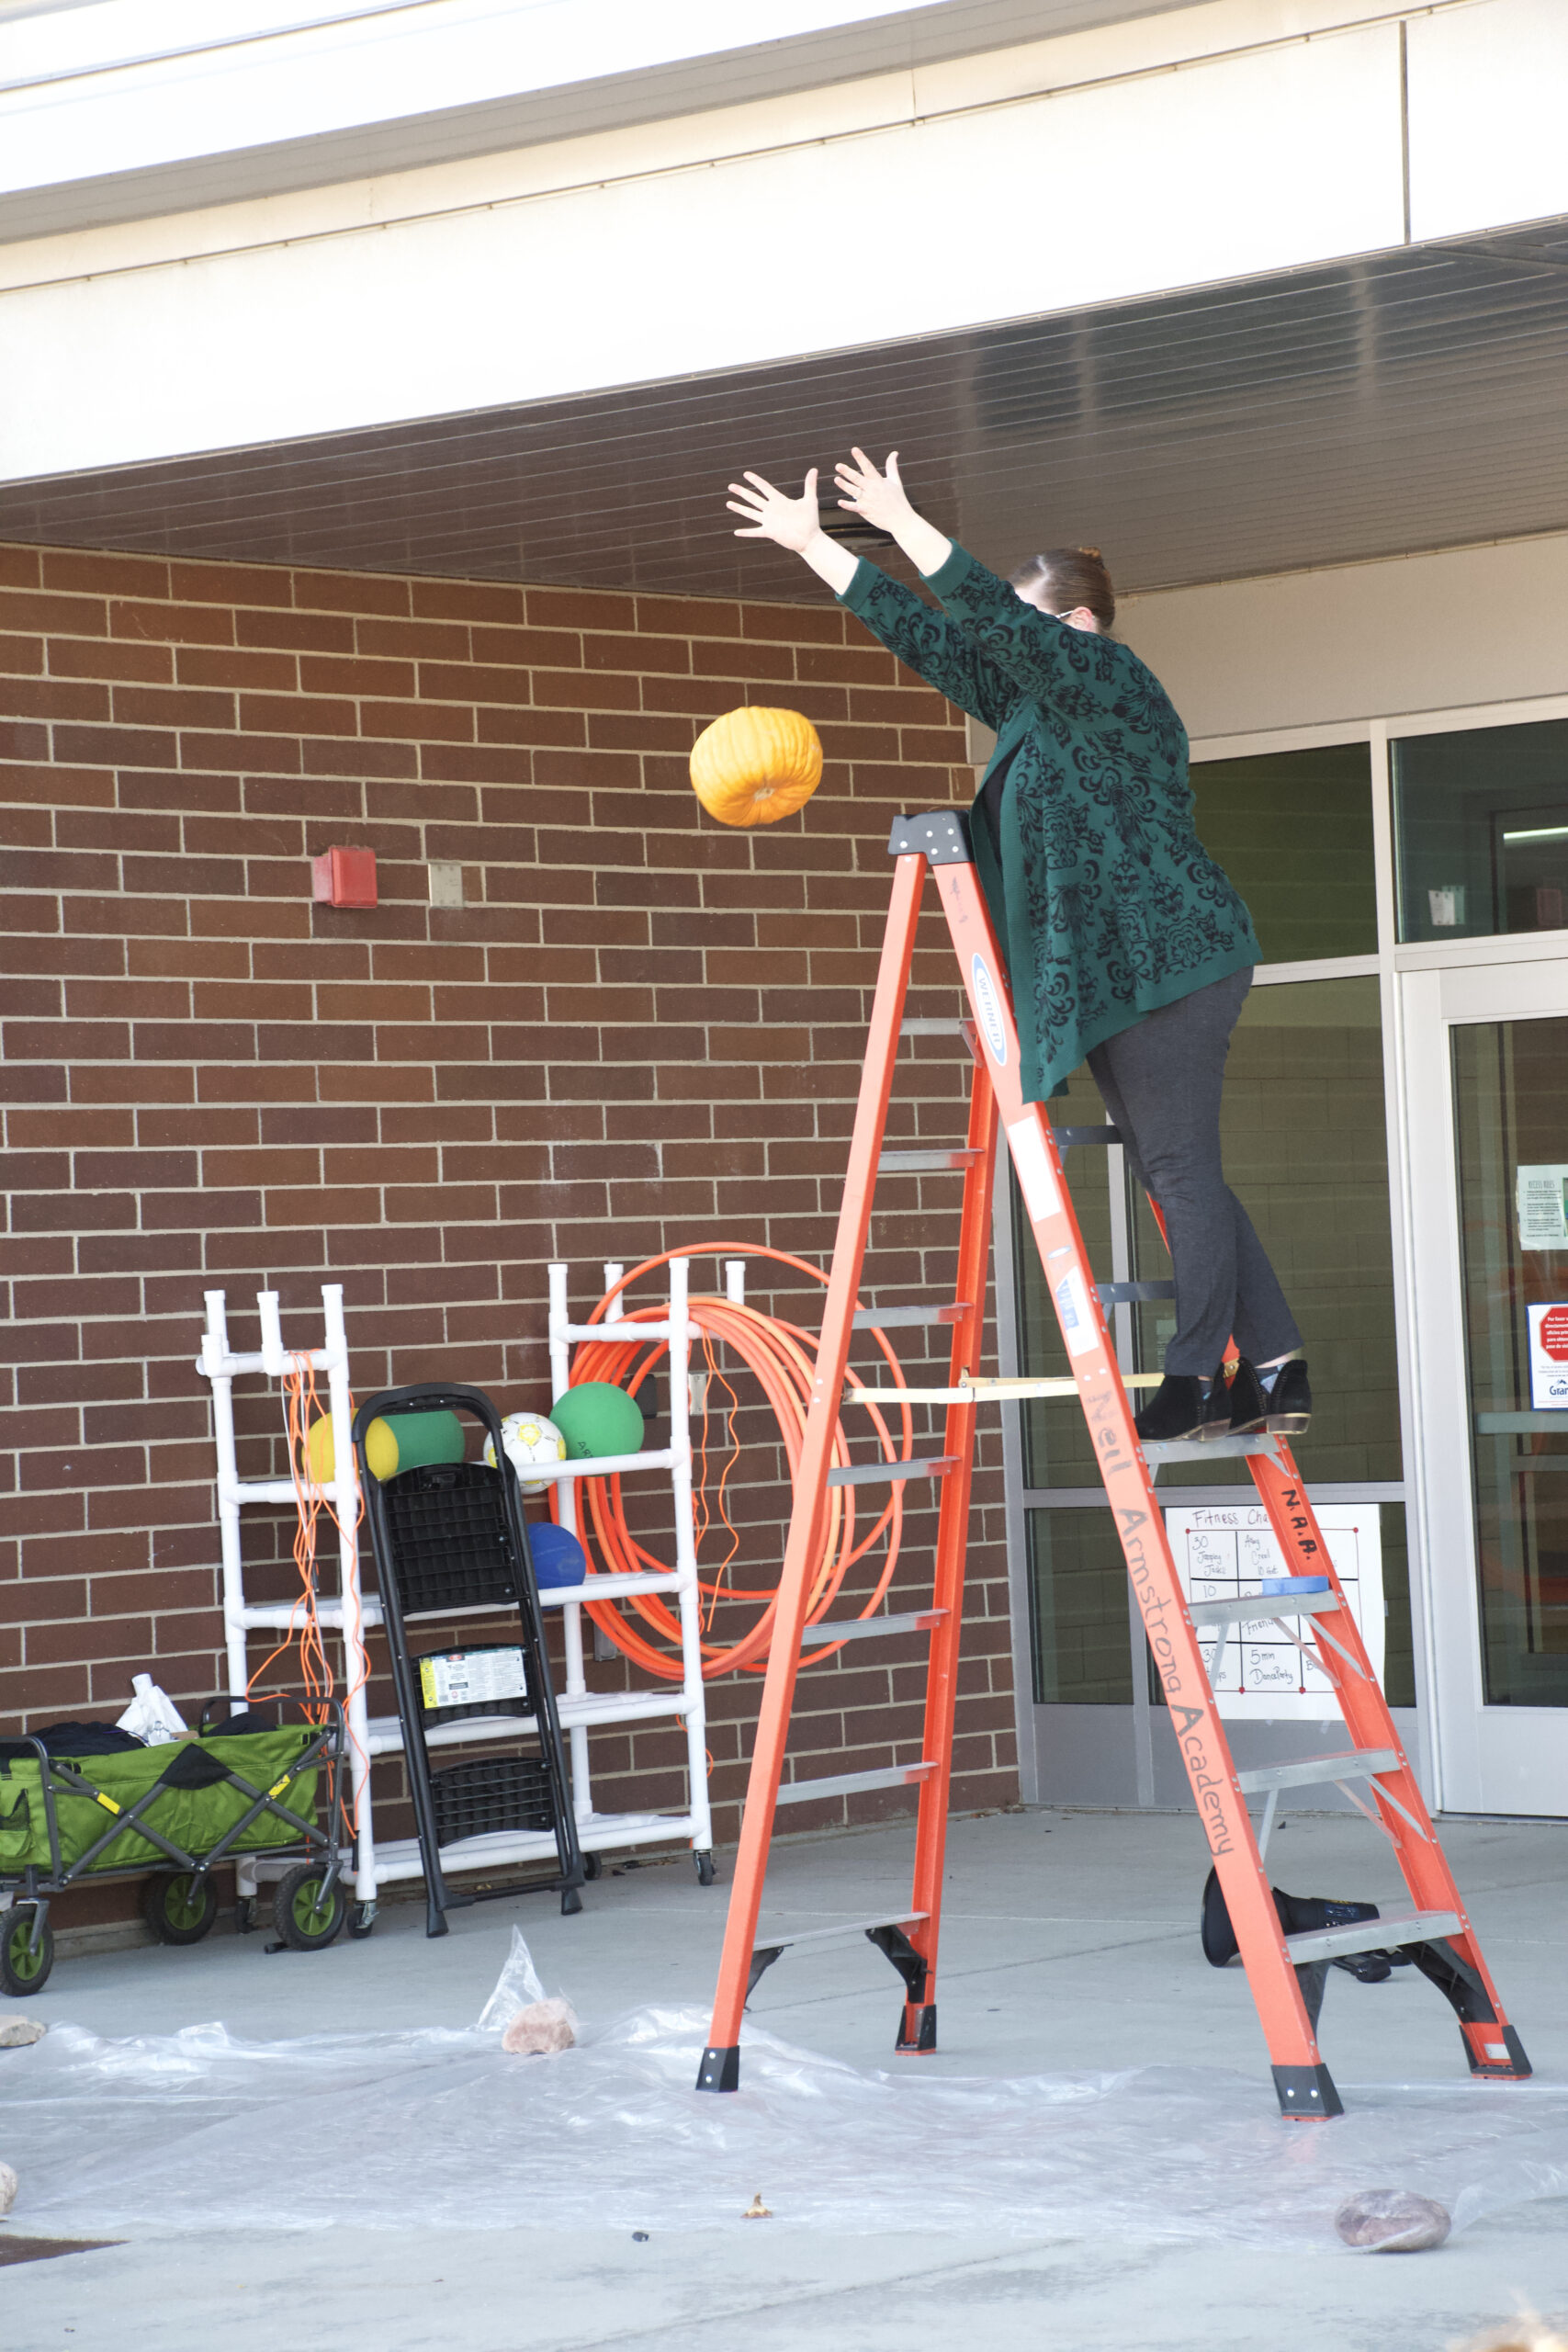 Students from Neil Armstrong STEM Academy study physics by dropping pumpkins from WVCFD fire truck ladder